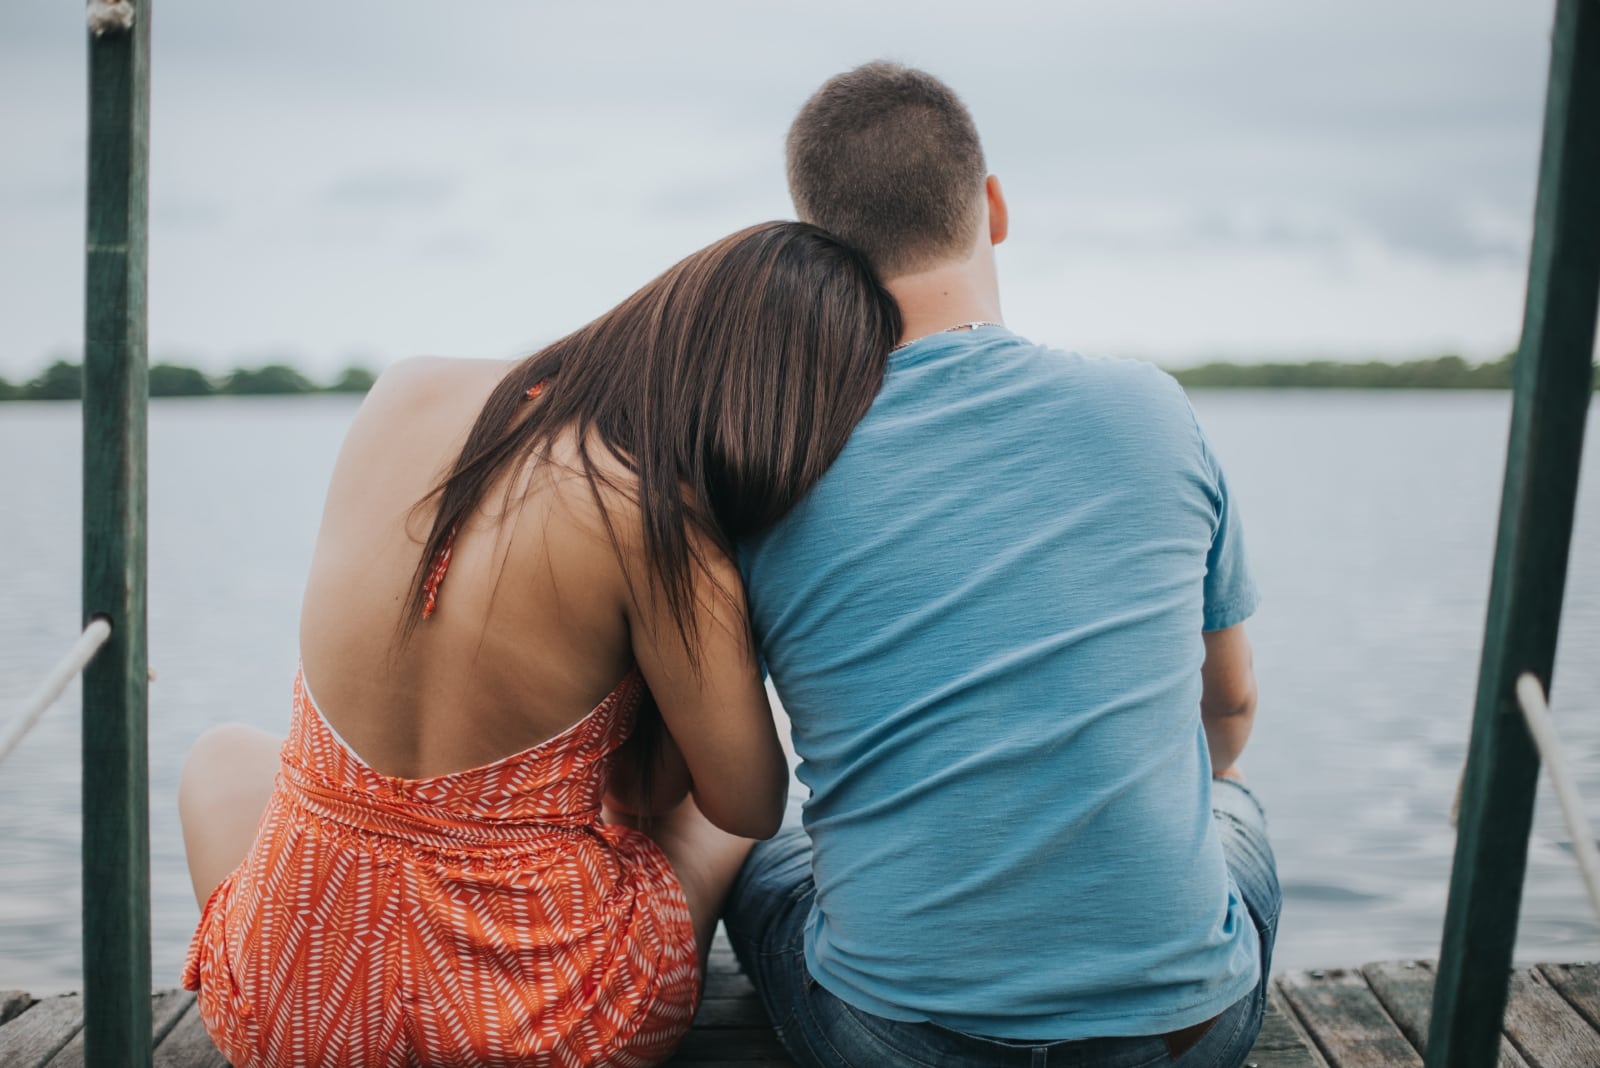 5 Men Reveal The Little Things Girls Do To Push Them Away